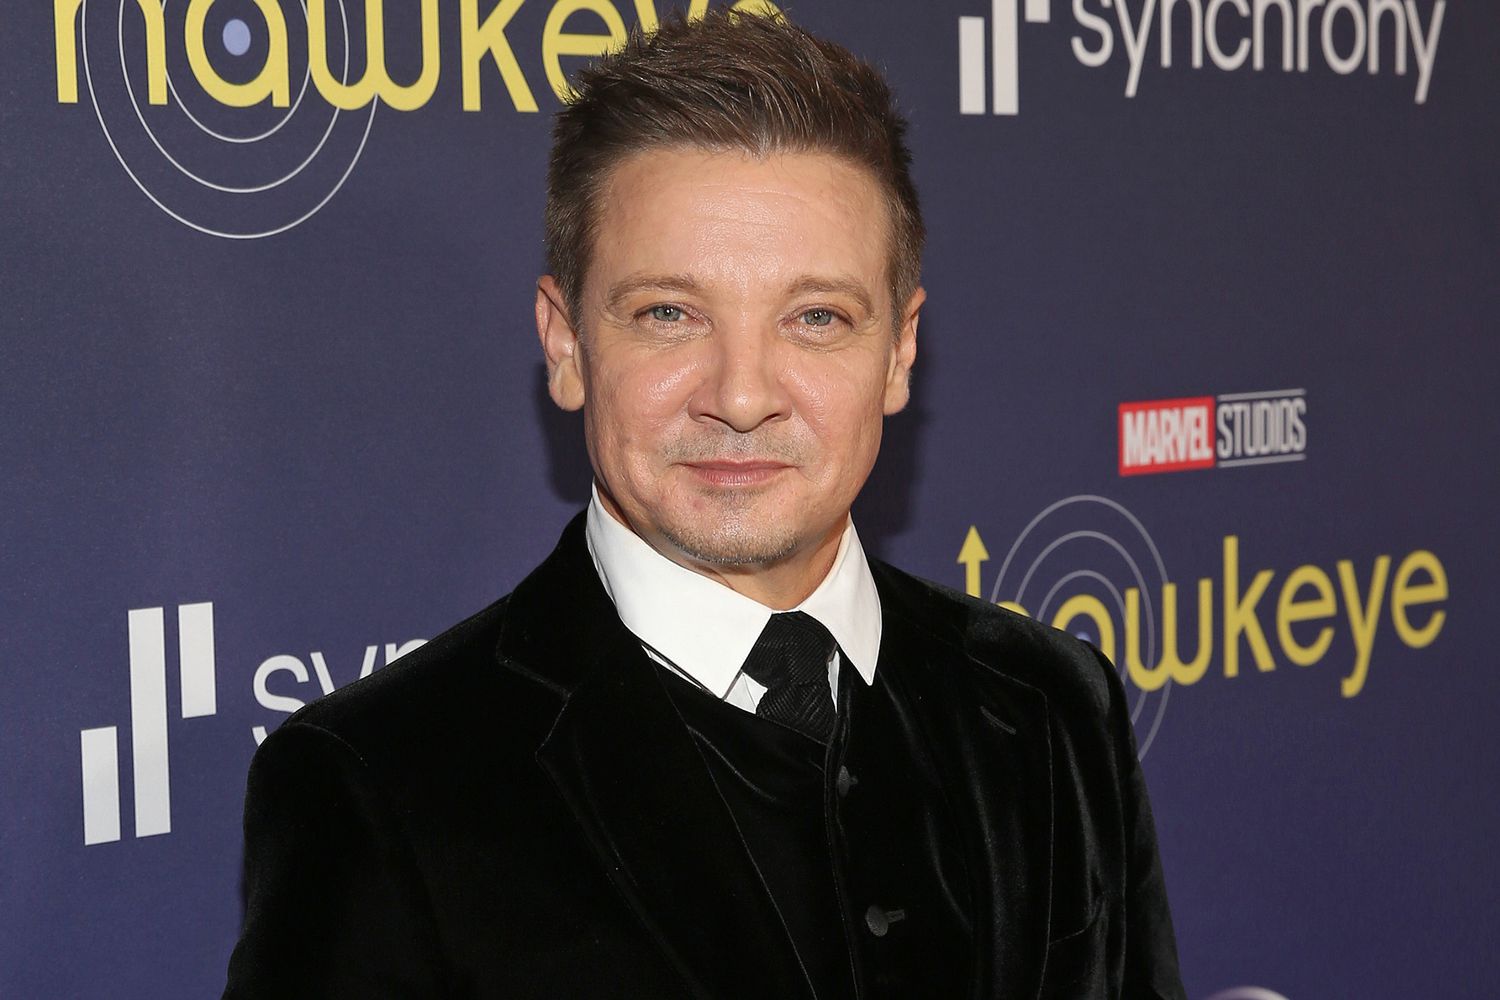 Jeremy Renner attends the Hawkeye Los Angeles Launch Event at El Capitan Theatre in Hollywood, California on November 17, 2021.